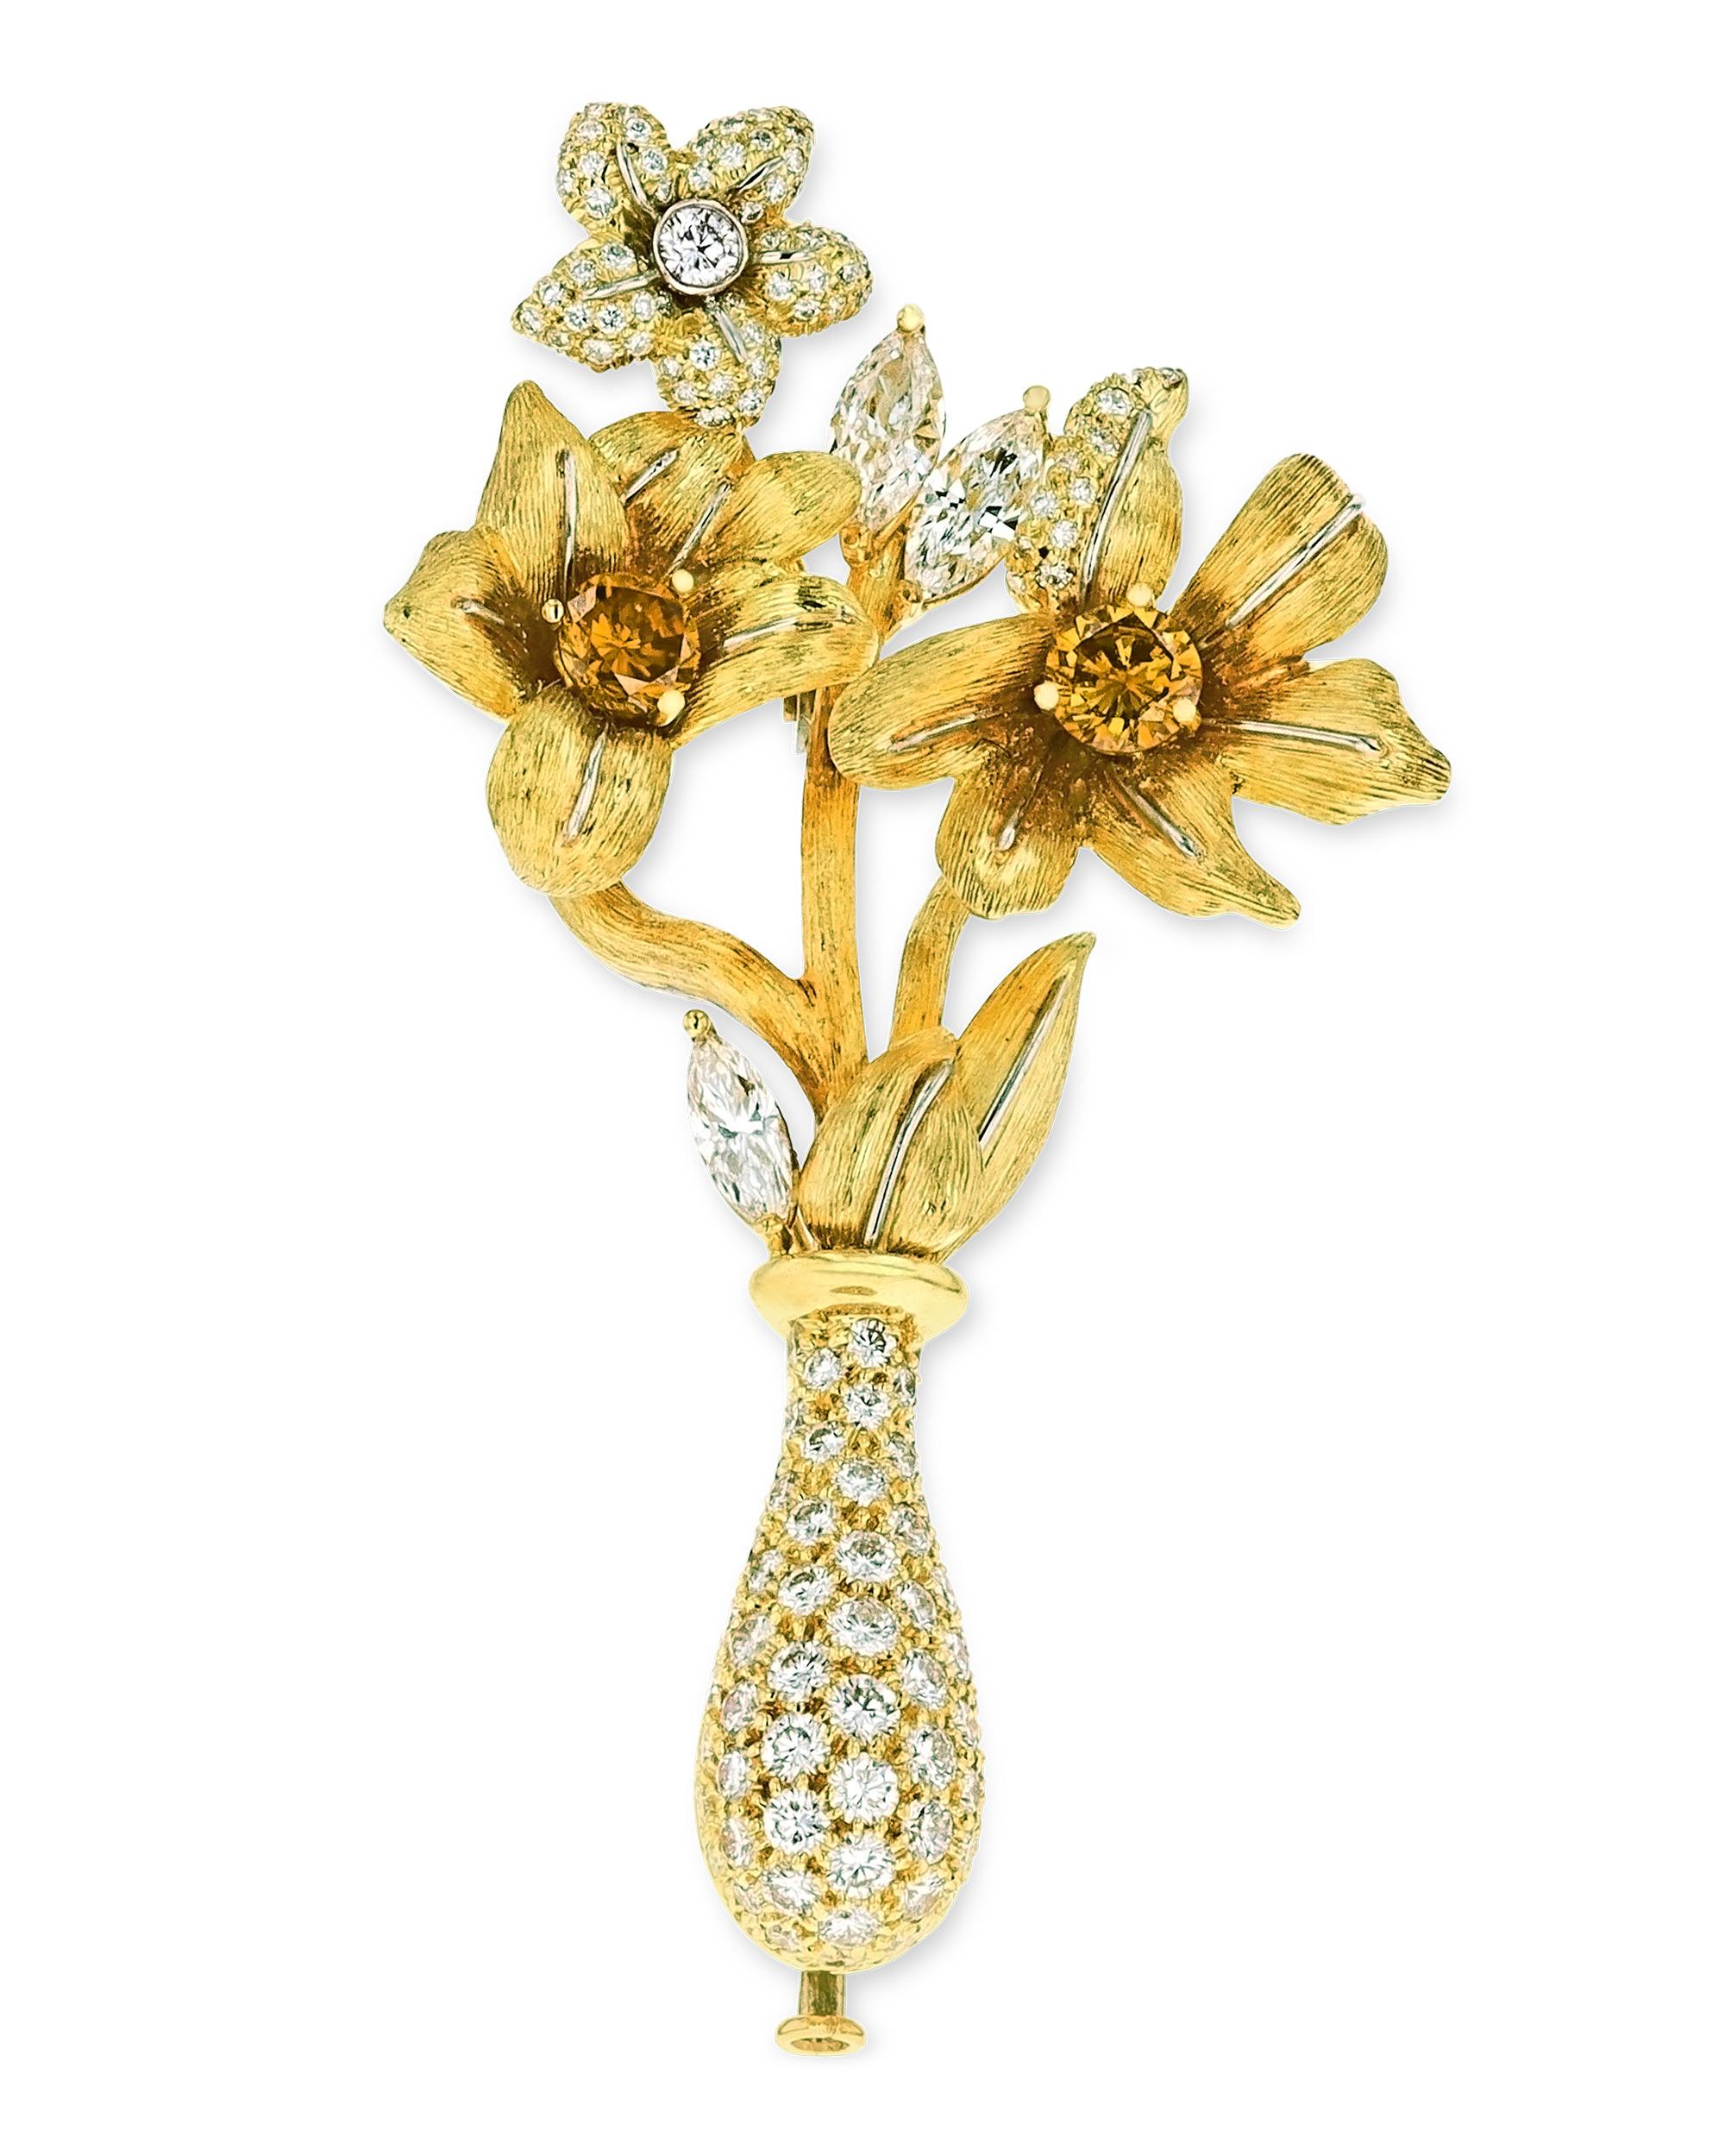 This sophisticated brooch from the famed American jeweler Henry Dunay takes the form of a bouquet of beautiful amaryllis flowers. Two colored diamonds totaling approximately 1.00 carat form the center of the two largest flowers, while 4.50 carats of